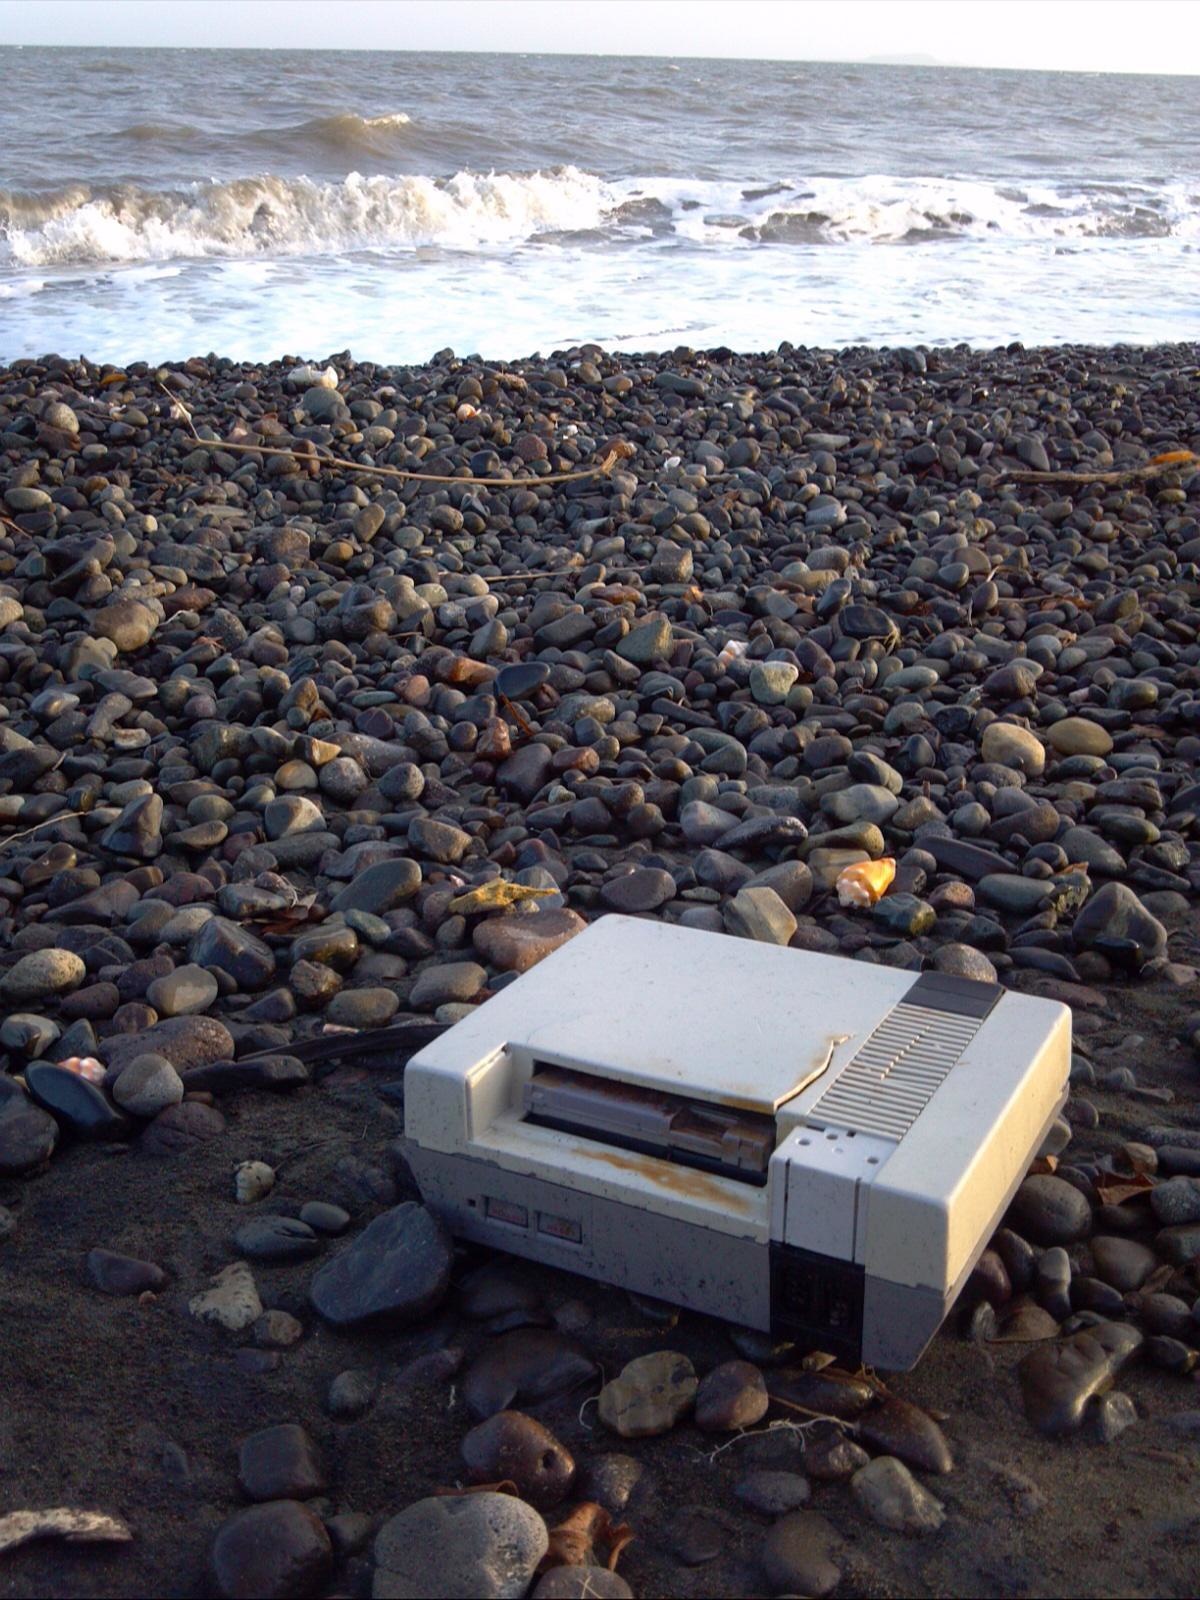 An NES found washed up on the beach.